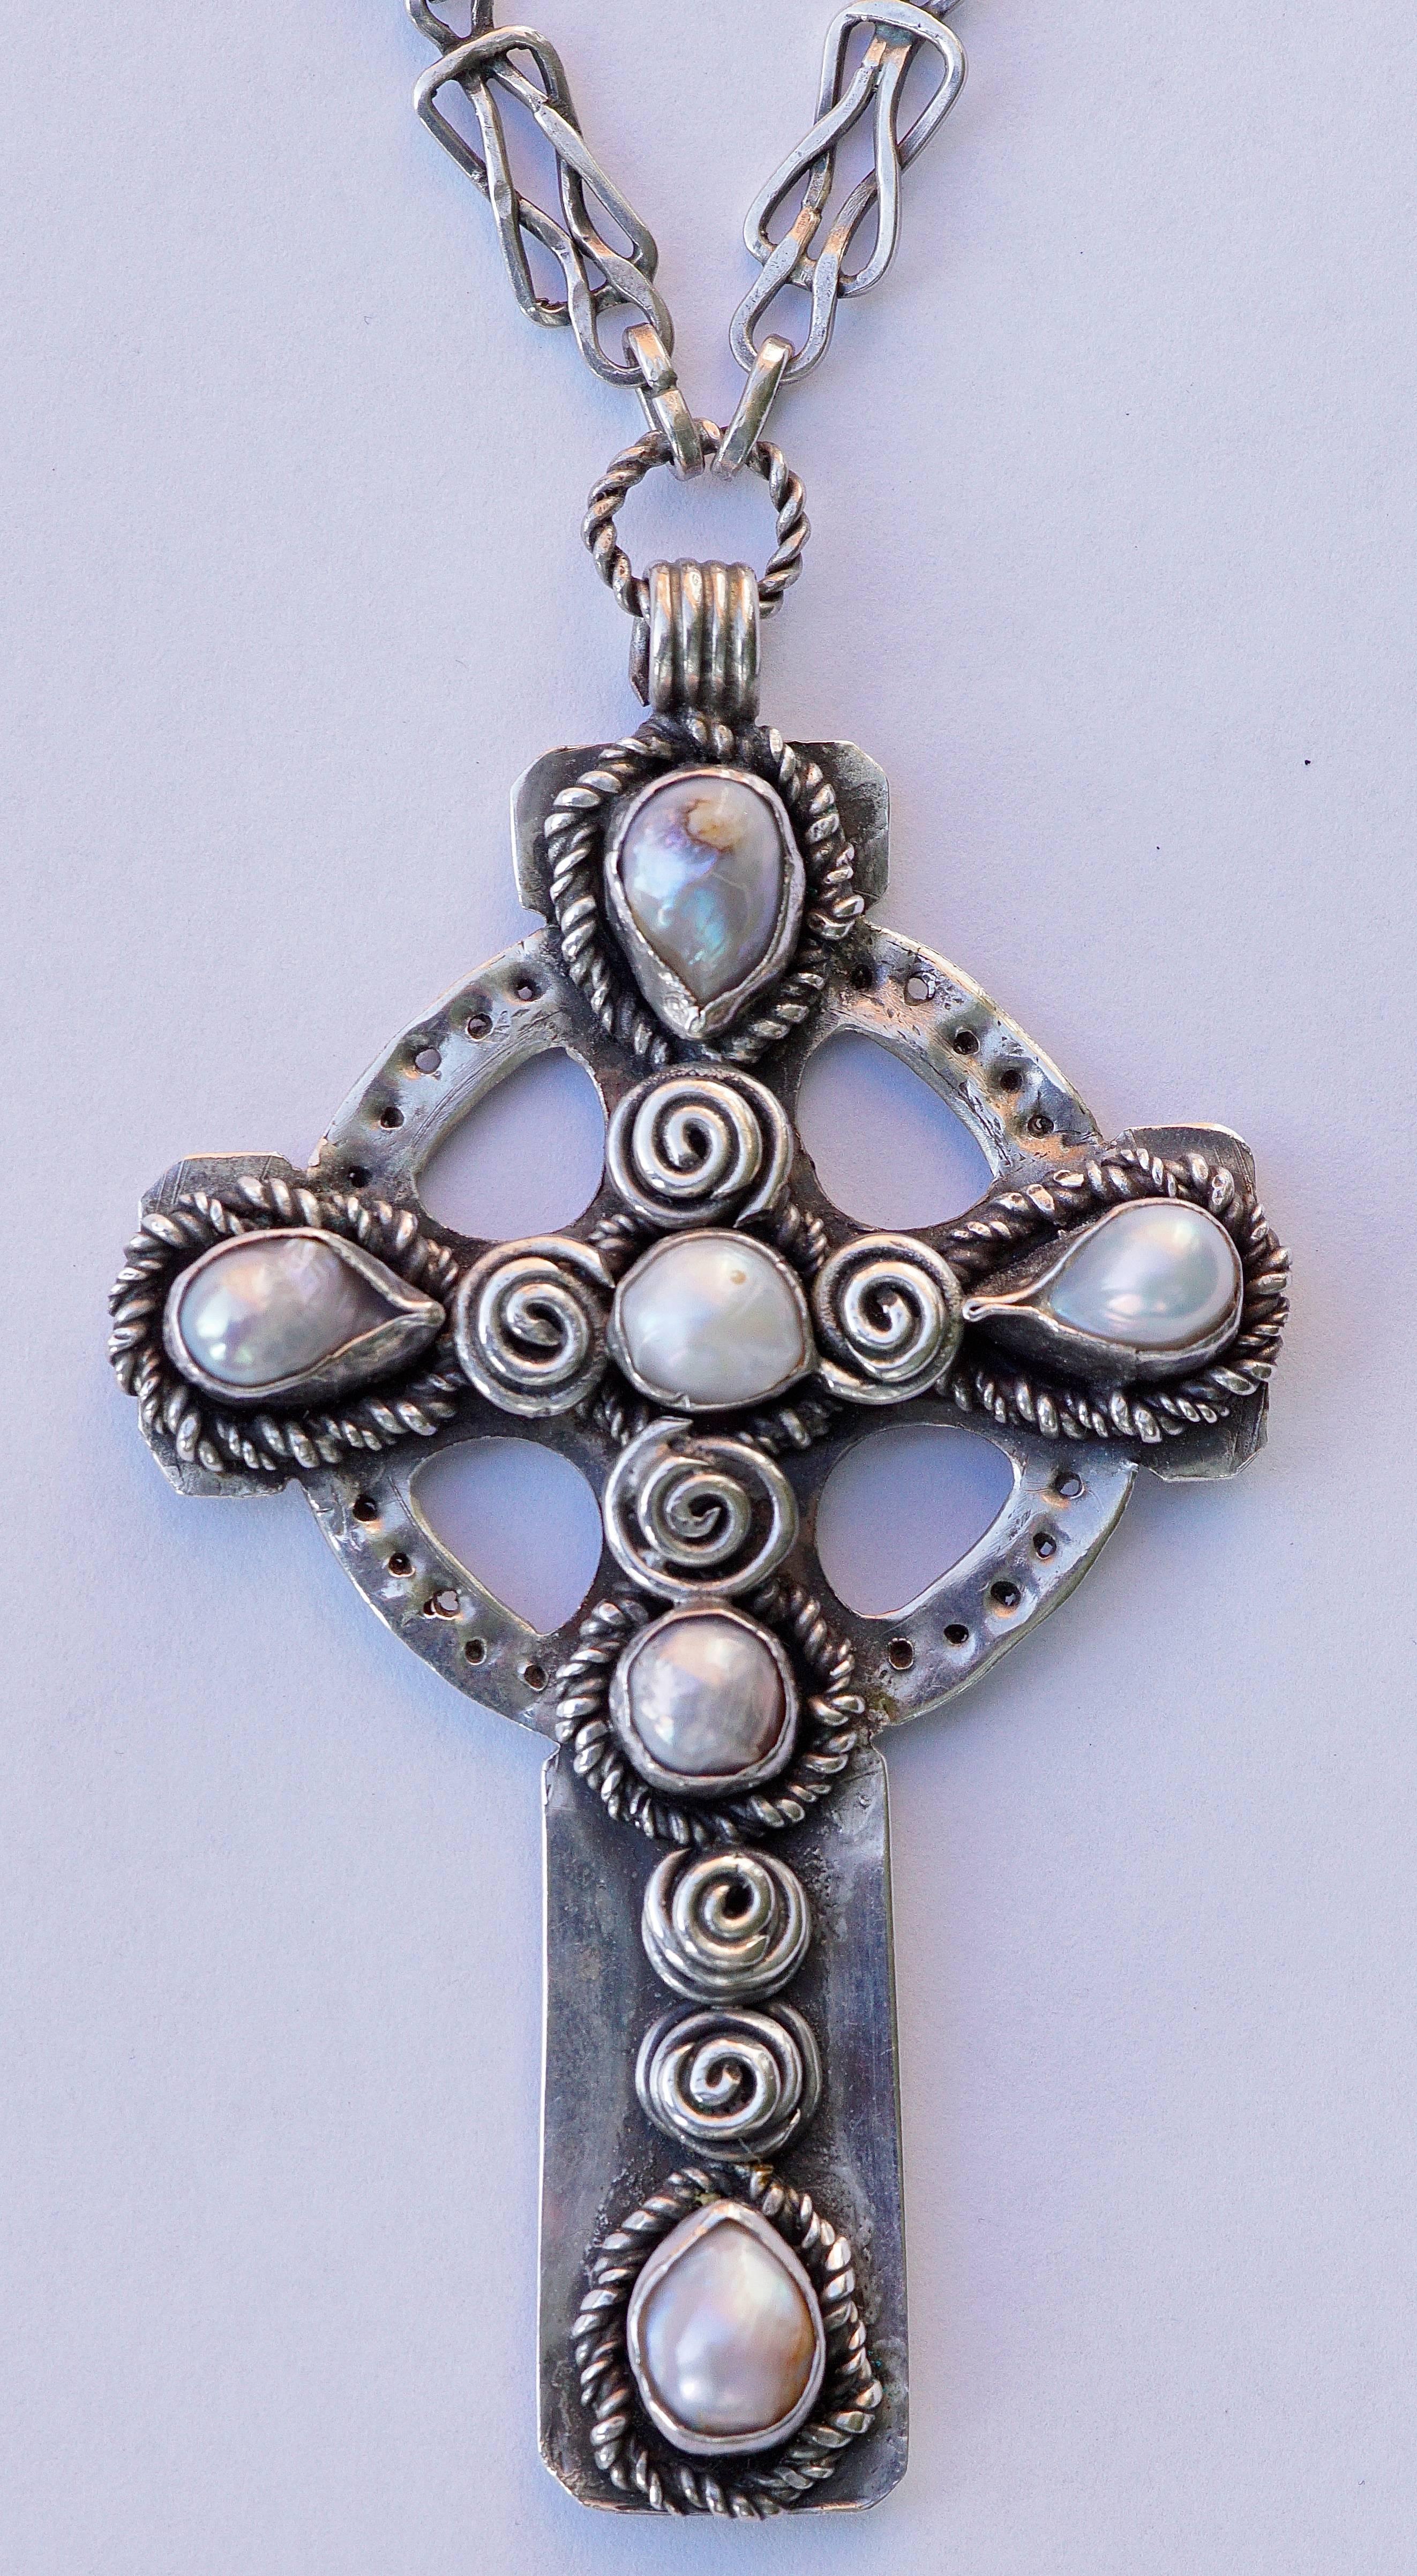 Fabulous silver and baroque pearl celtic design cross and chain, in very good condition. There are no hallmarks, but tests as silver, and weighs a substantial 49.5 grams.

The fancy link chain has a toggle clasp, and is length 64.5cm, 25.39 inches.